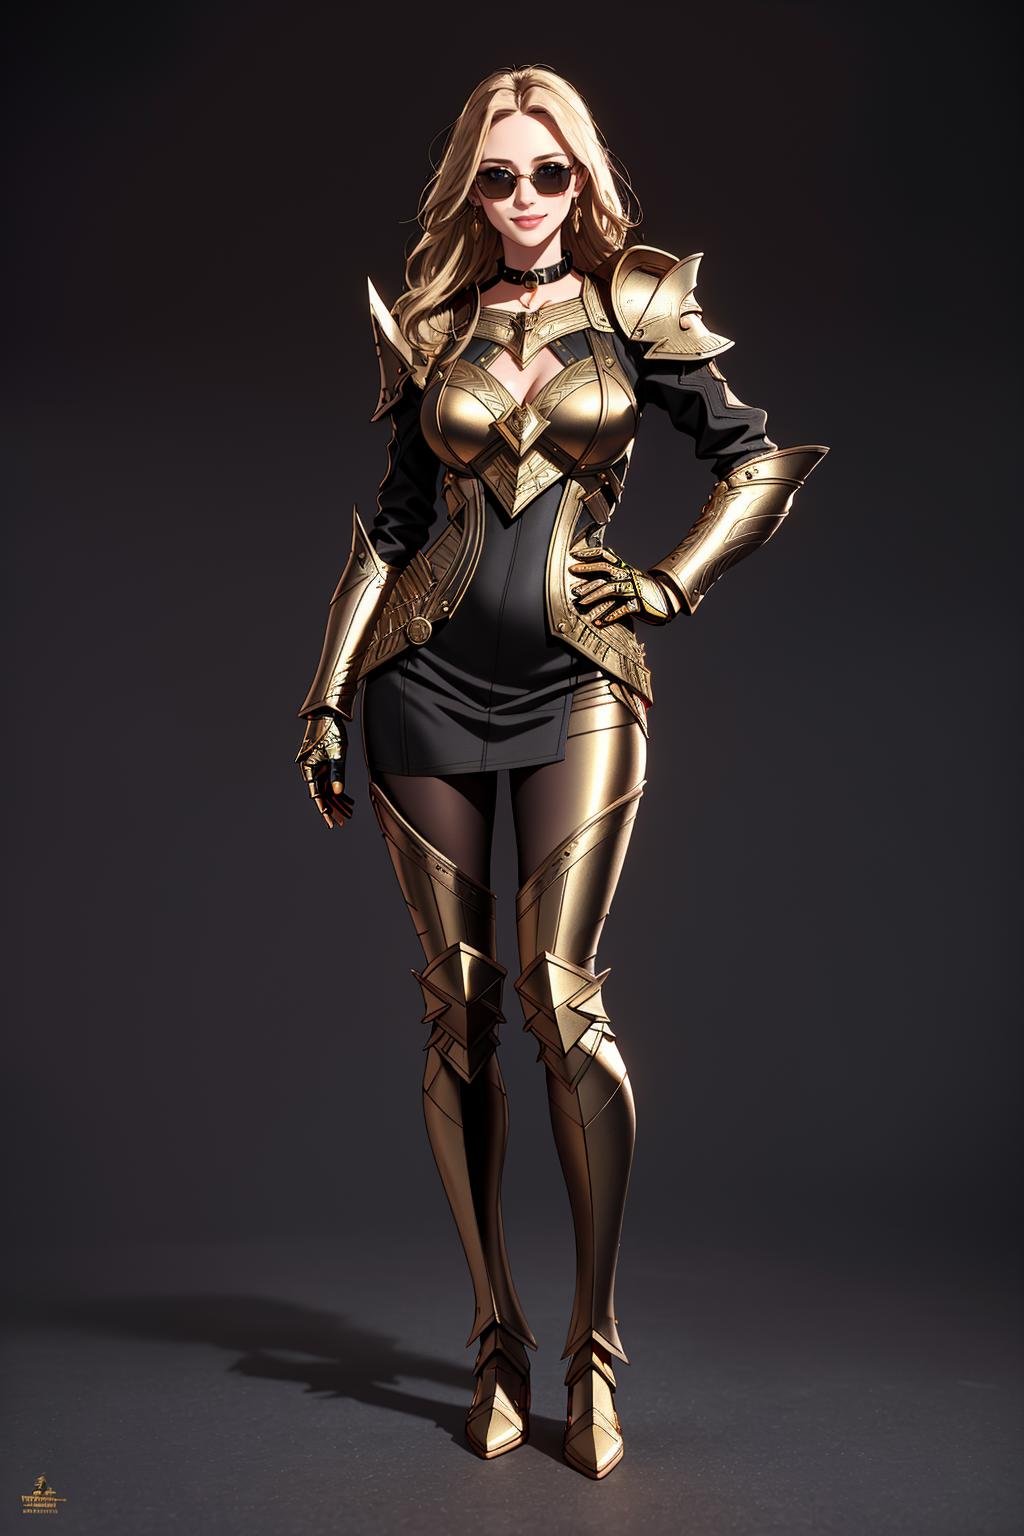 ((Masterpiece, best quality,edgQuality)),smiling,excited,(standing,full body)edgGolden, a woman dressed in golden armor ,wearing edgGoldenBlonde Nadia with (sunglasses and a choker)<lora:Ultimate_Nadia:0.5> <lora:edgNadiaGolden:0.8>